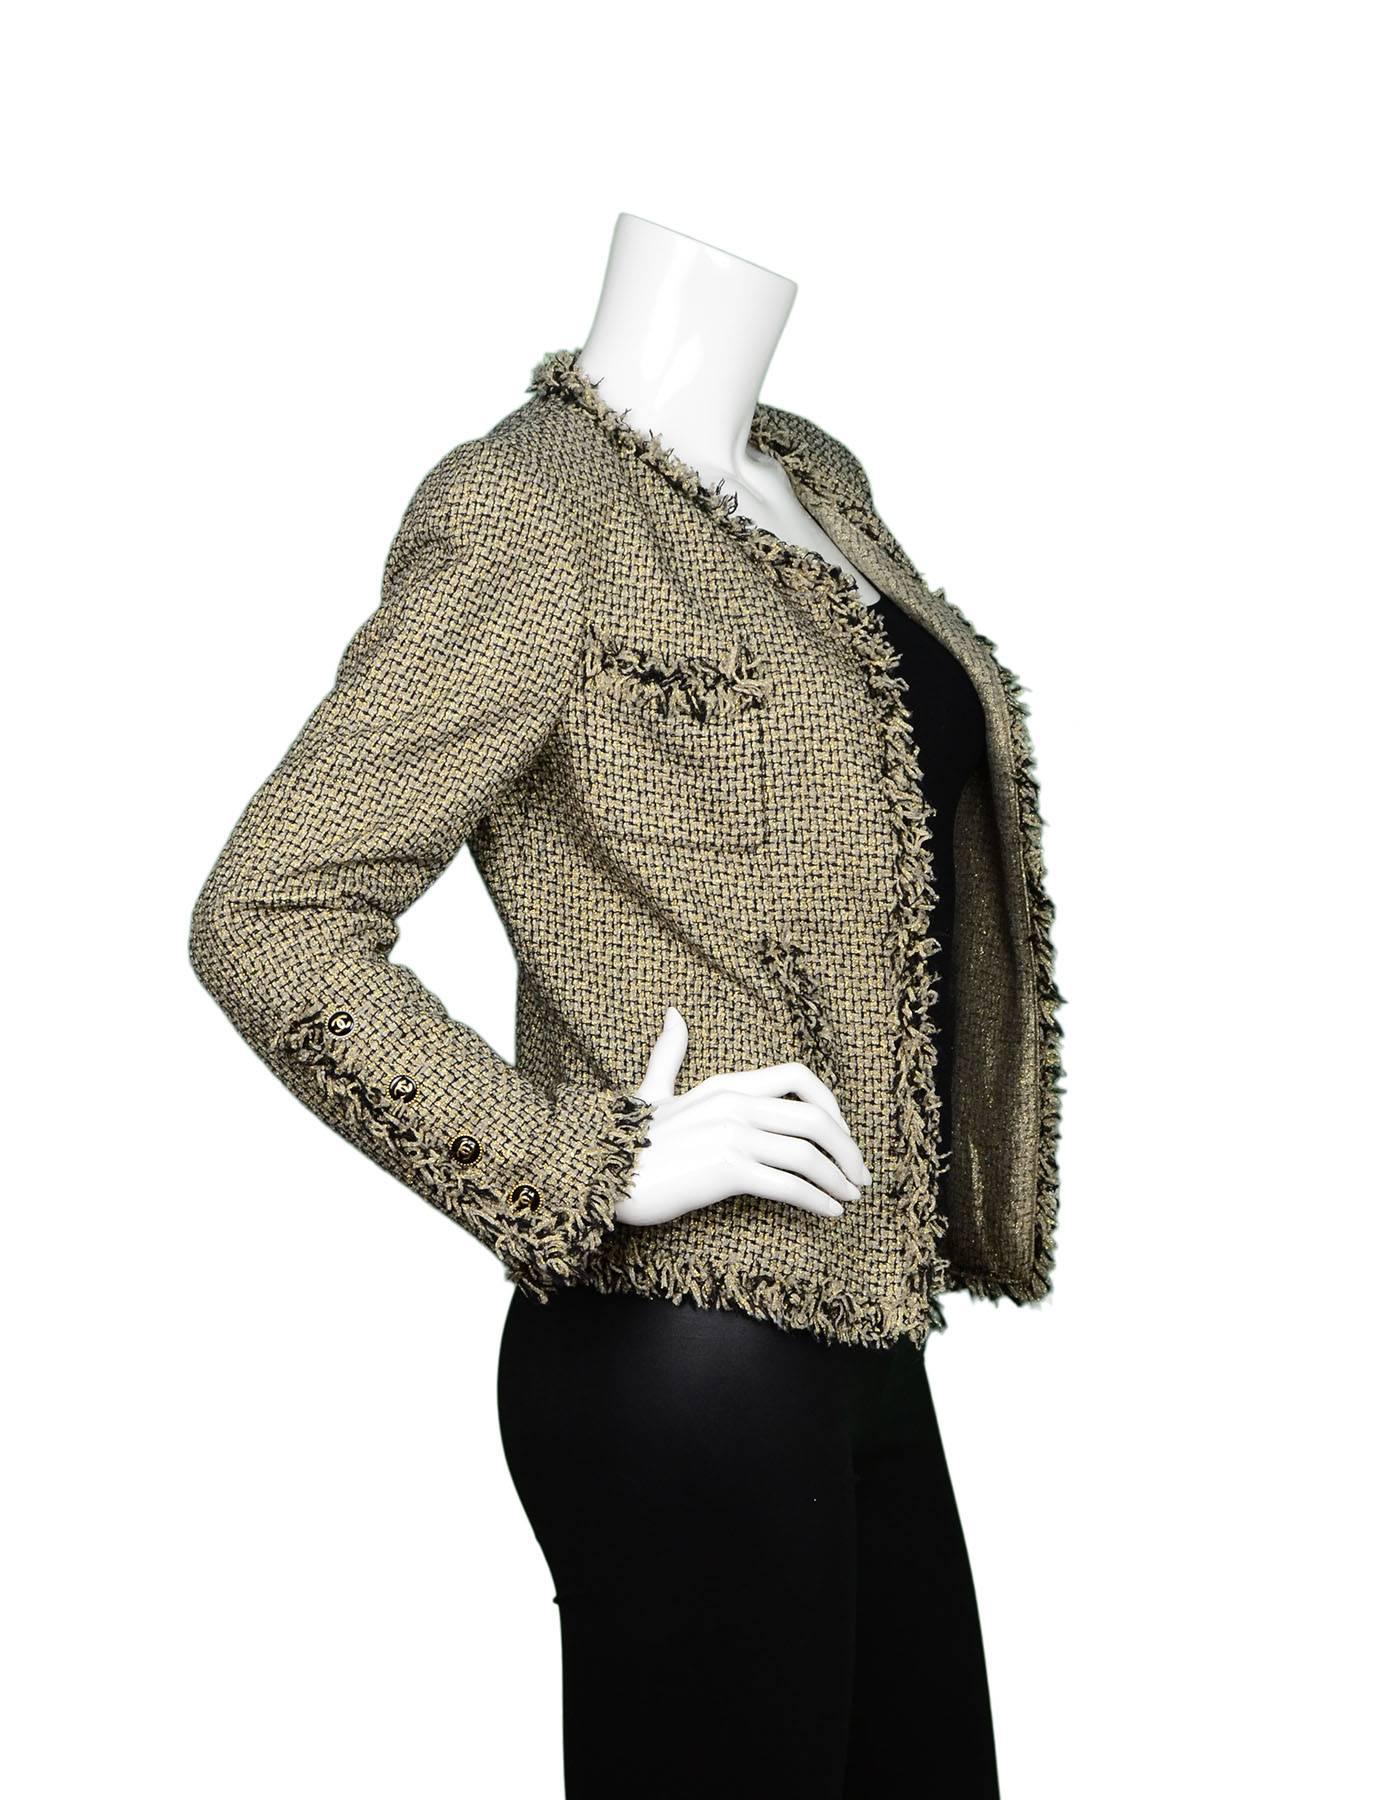 Chanel Black & Gold Tweed Open Jacket  
Features fringe trim throughout

Made In: France
Year of Production: 2007
Color: Black and metallic gold
Composition: 44% acetate, 28% nylon, 14% polyester, 14% silk
Lining: Metallic gold and black, 75%